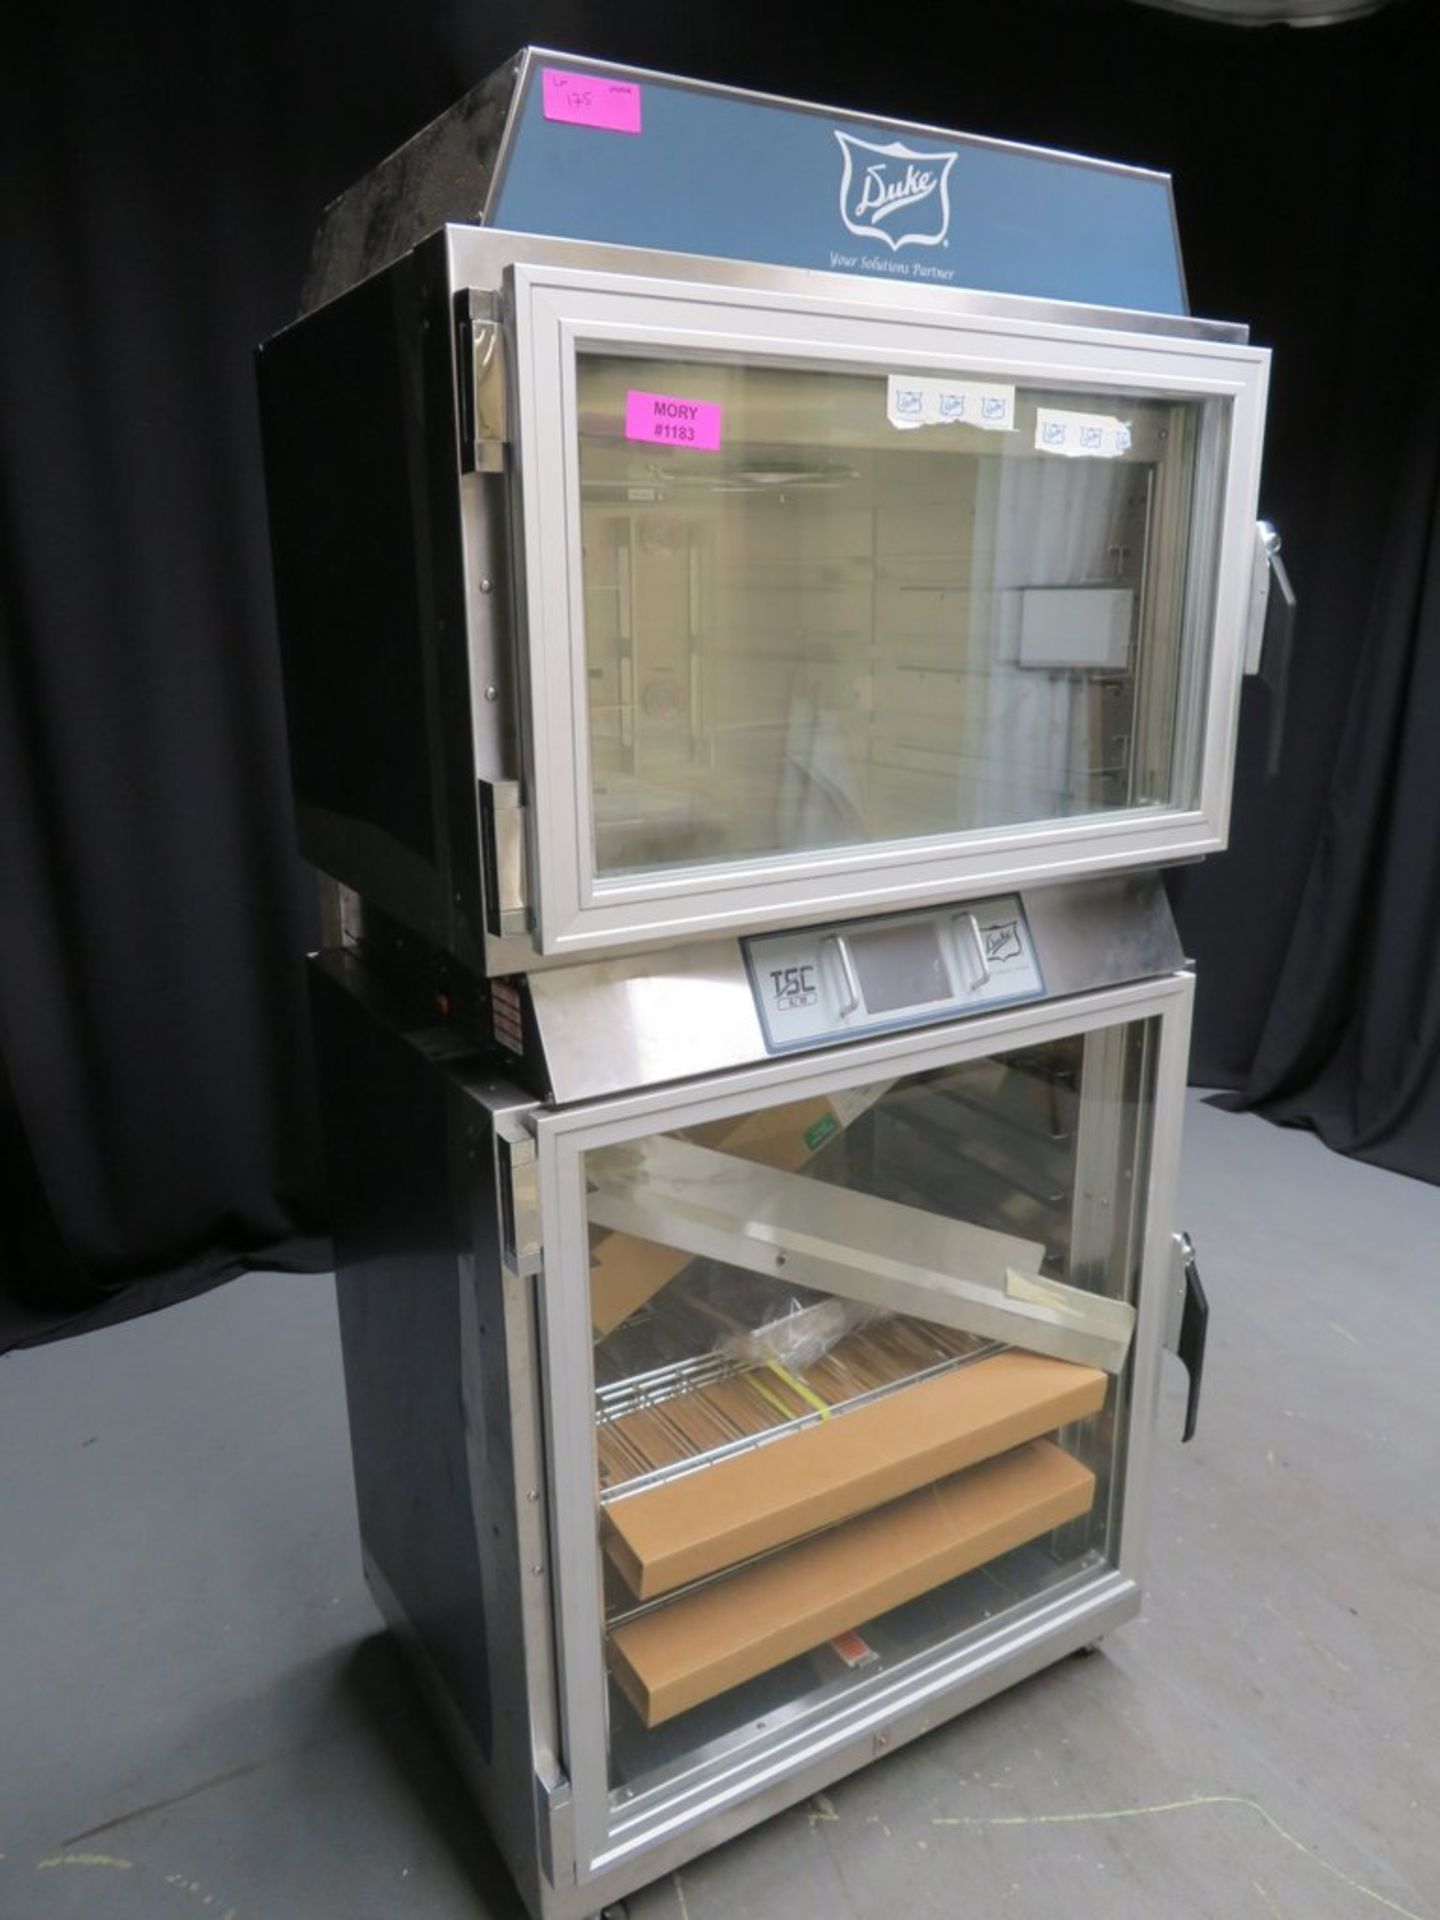 Duke TSC 6/18 proofer oven (touch screen control), 3 phase electric - Image 2 of 10